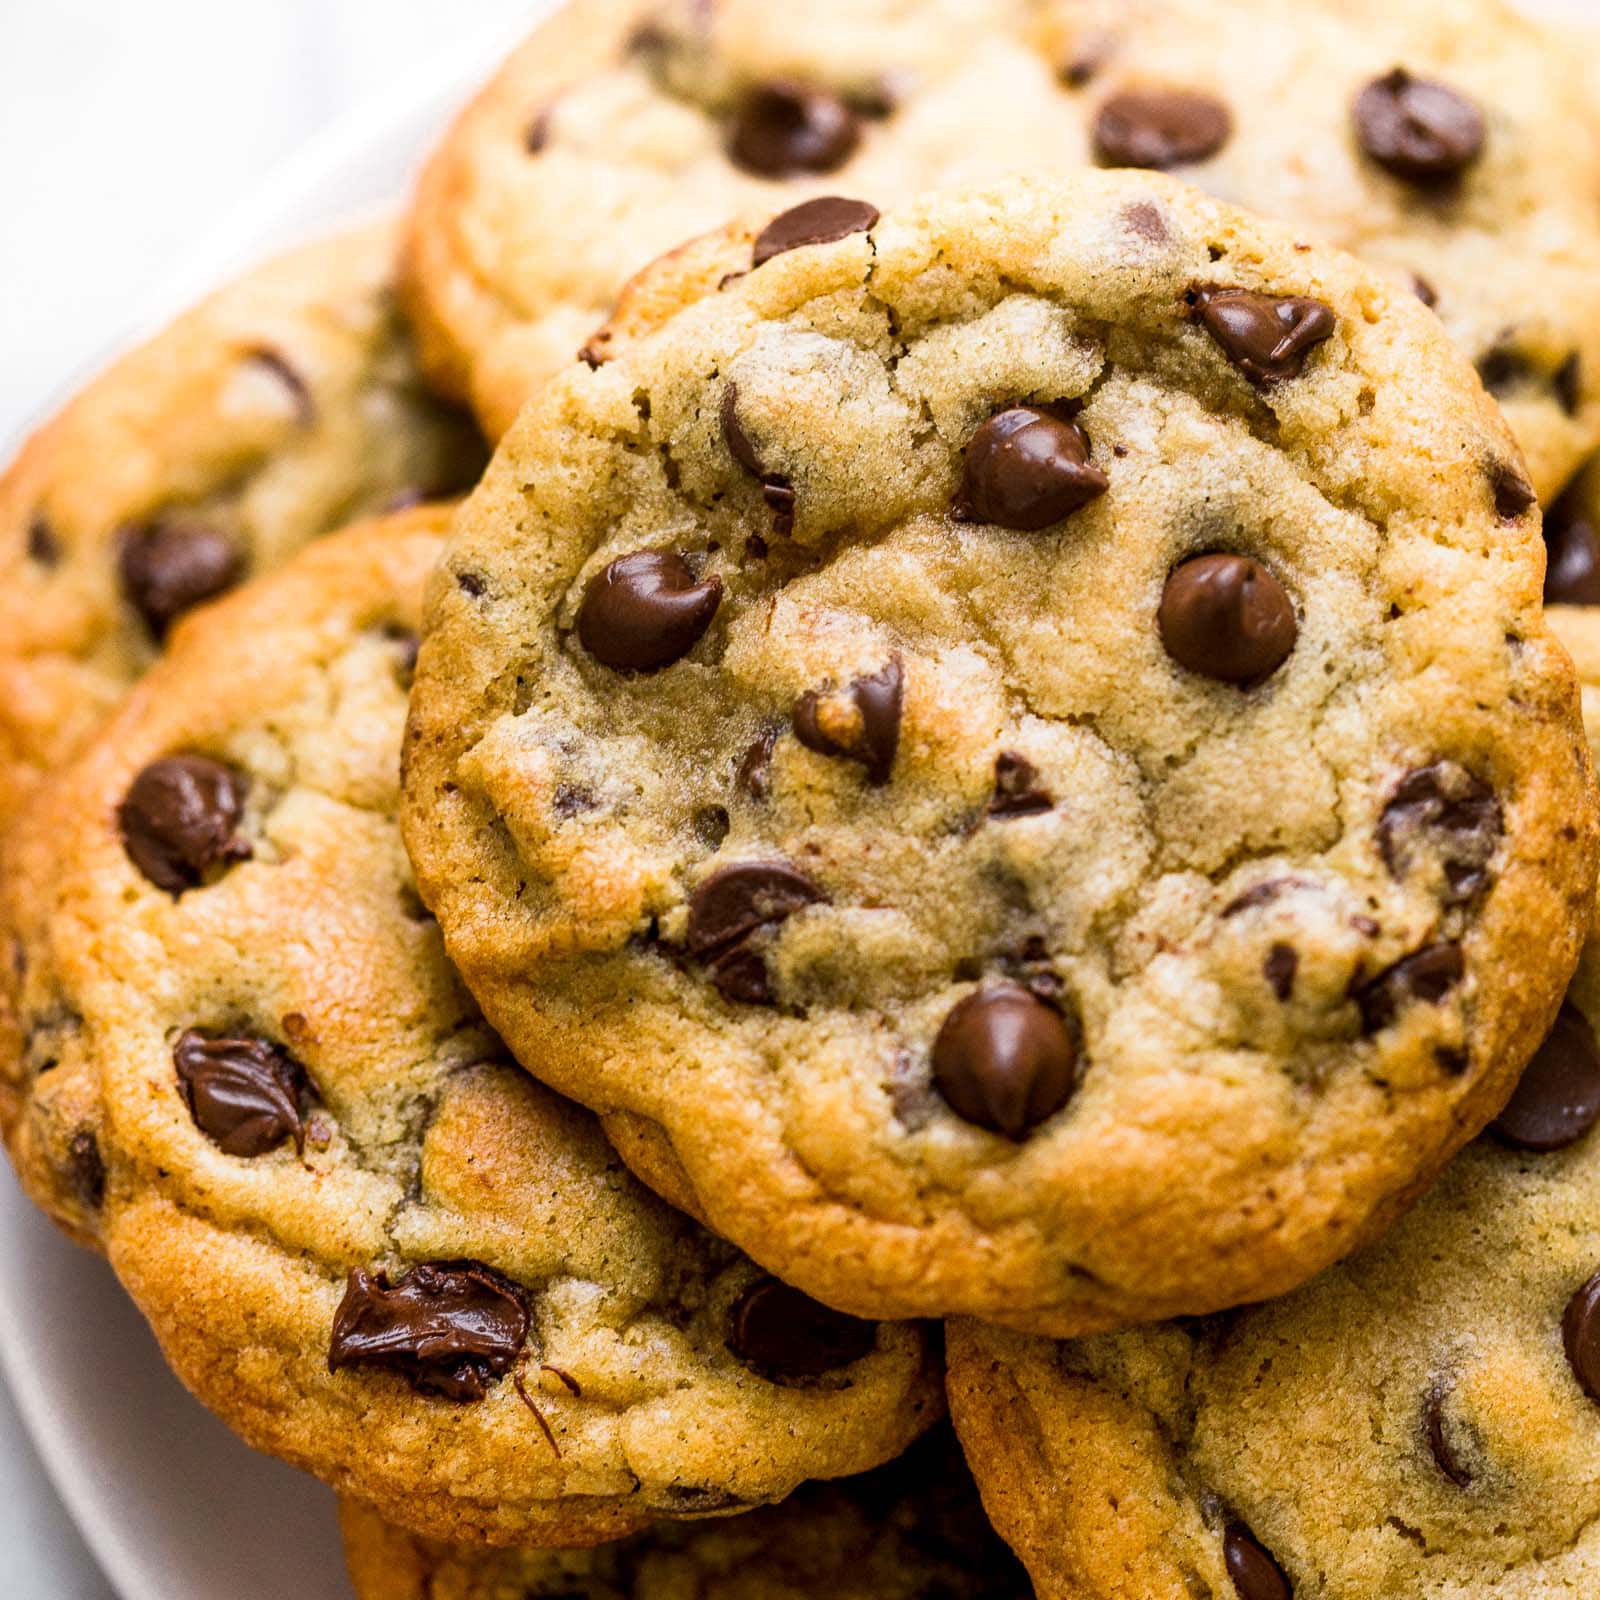 Which cookie is best: Sugar or Chocolate Chip?